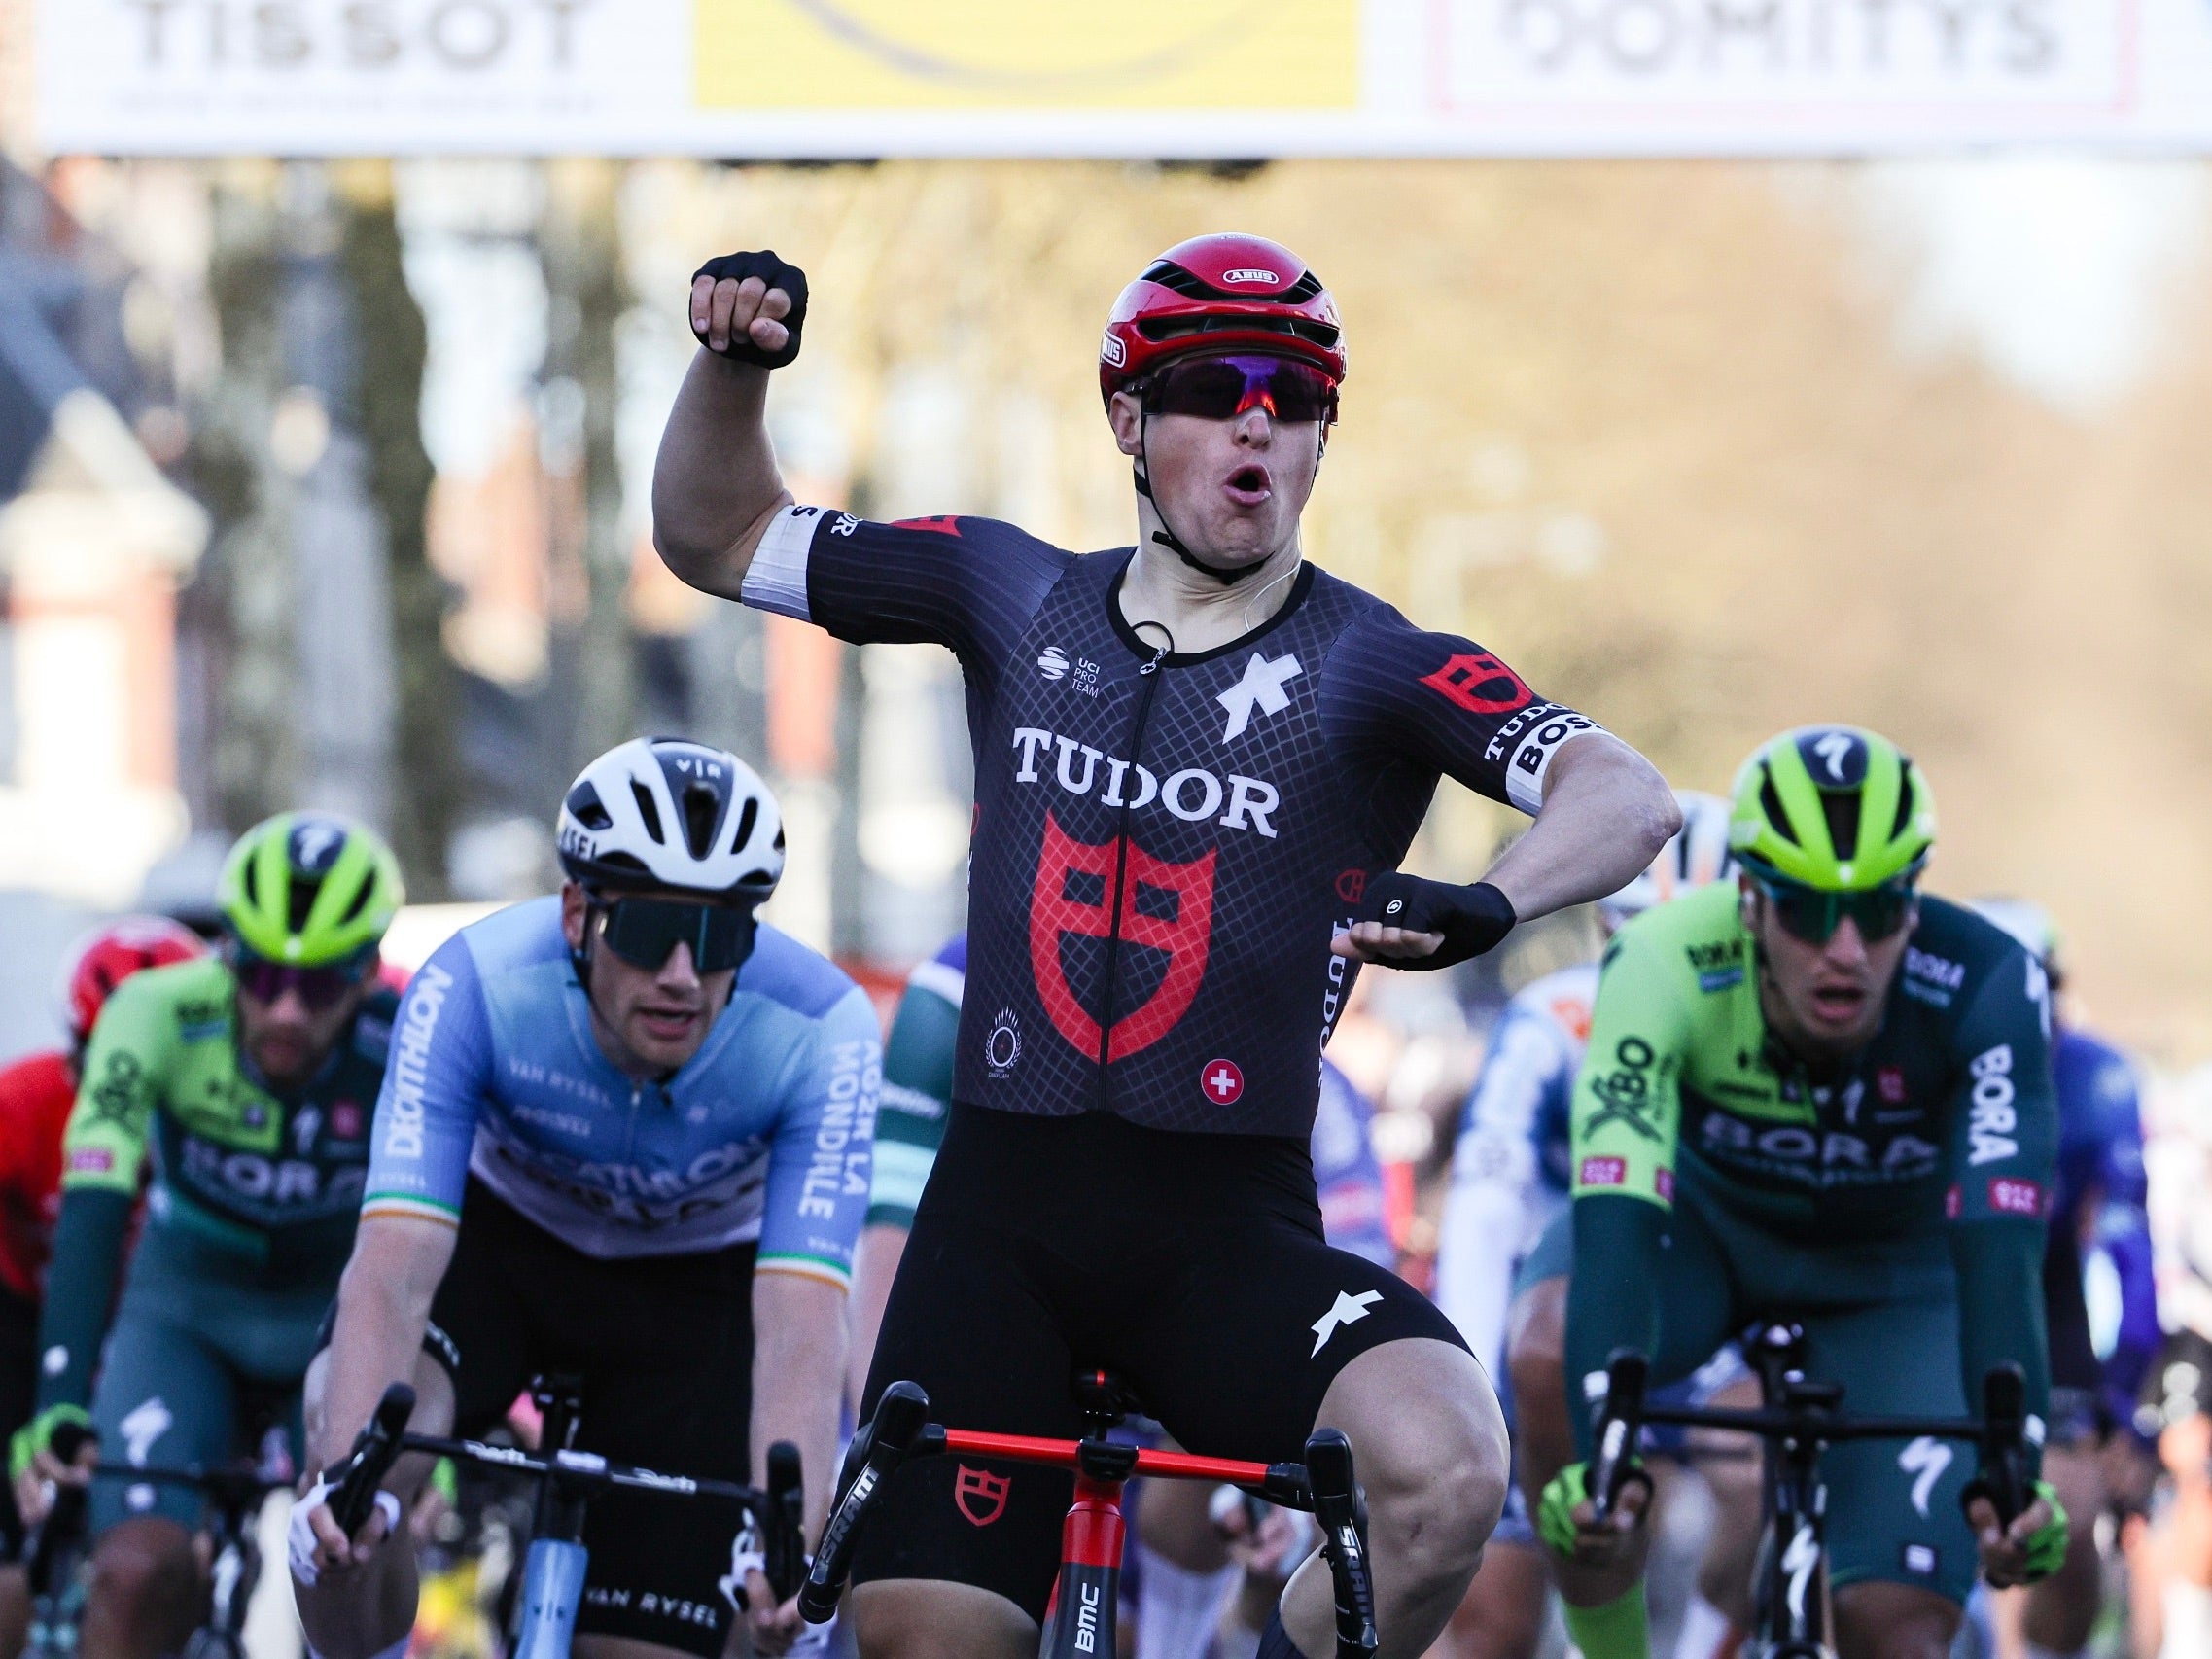 BMC | Tudor Pro Cycling scores first WorldTour stage victory in Paris-Nice